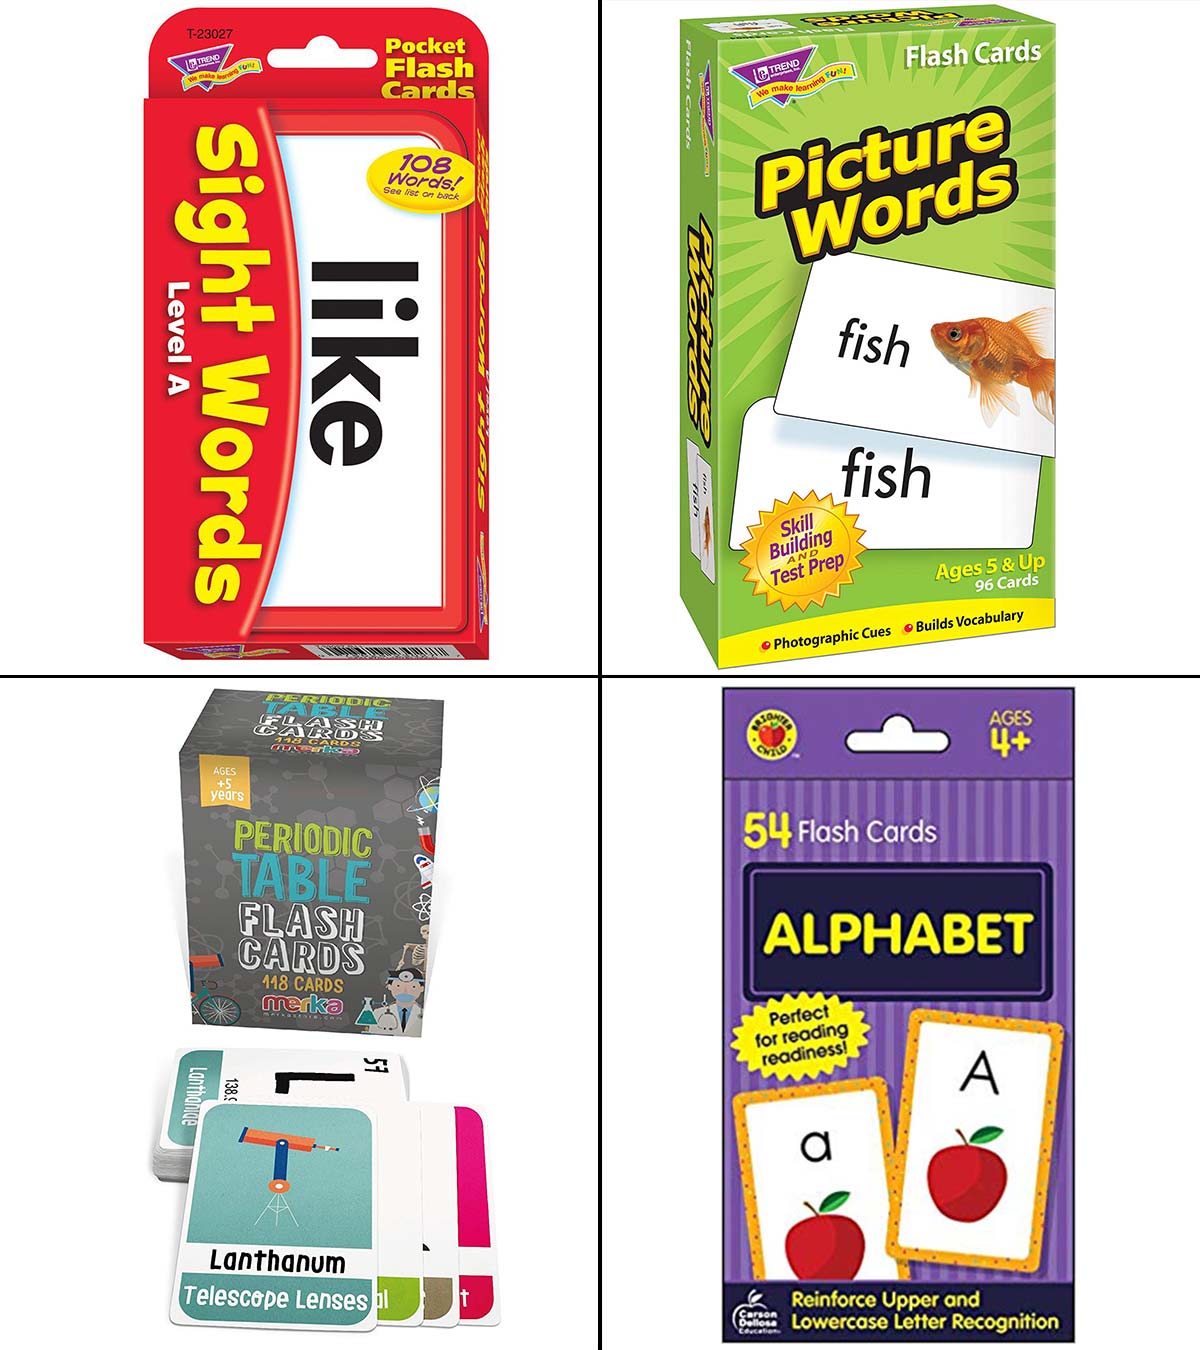 Different Types of flash card - World of Better Learning